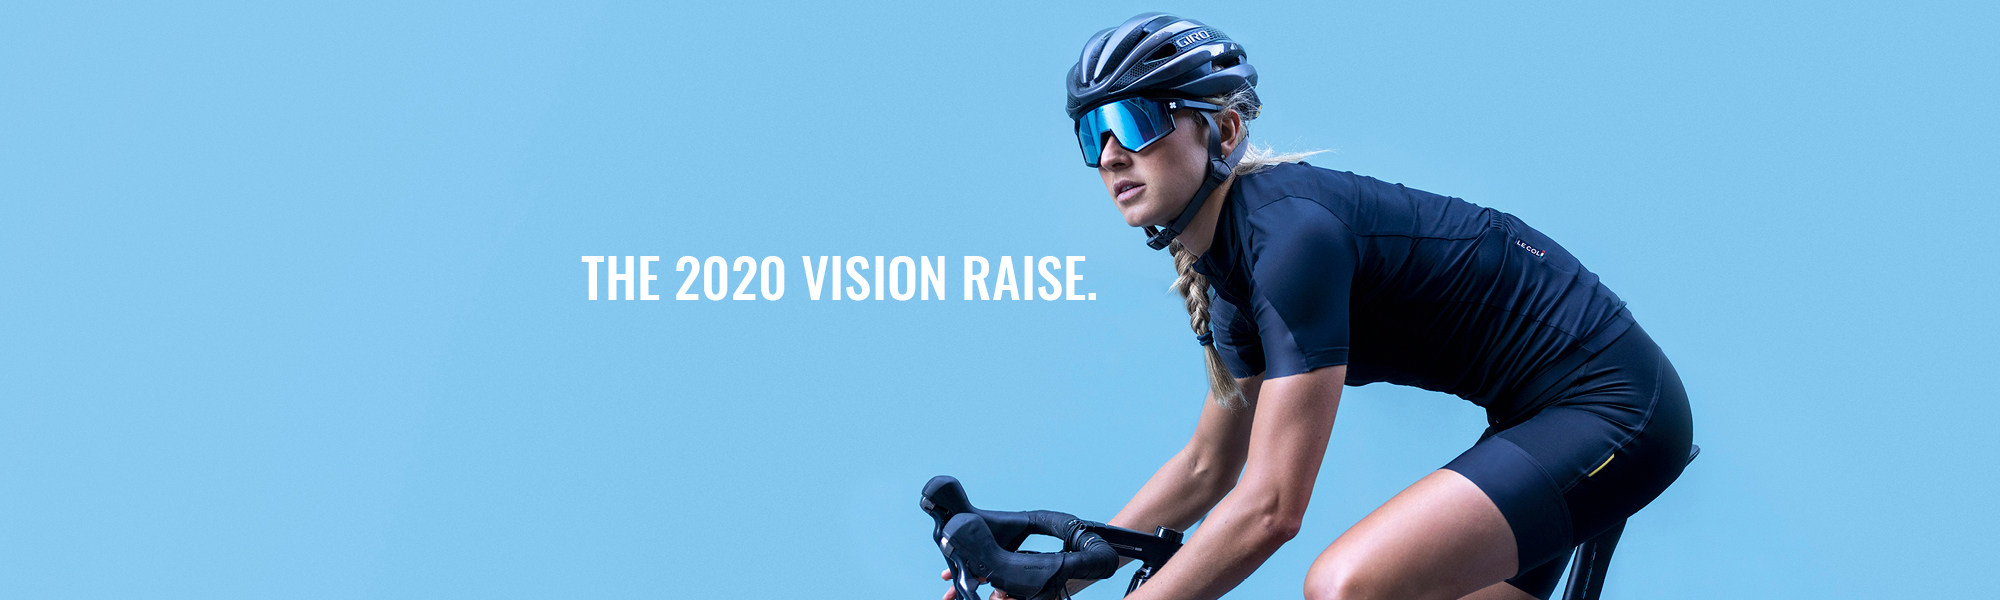 The 2020 Vision Raise: We Are Crowdfunding!